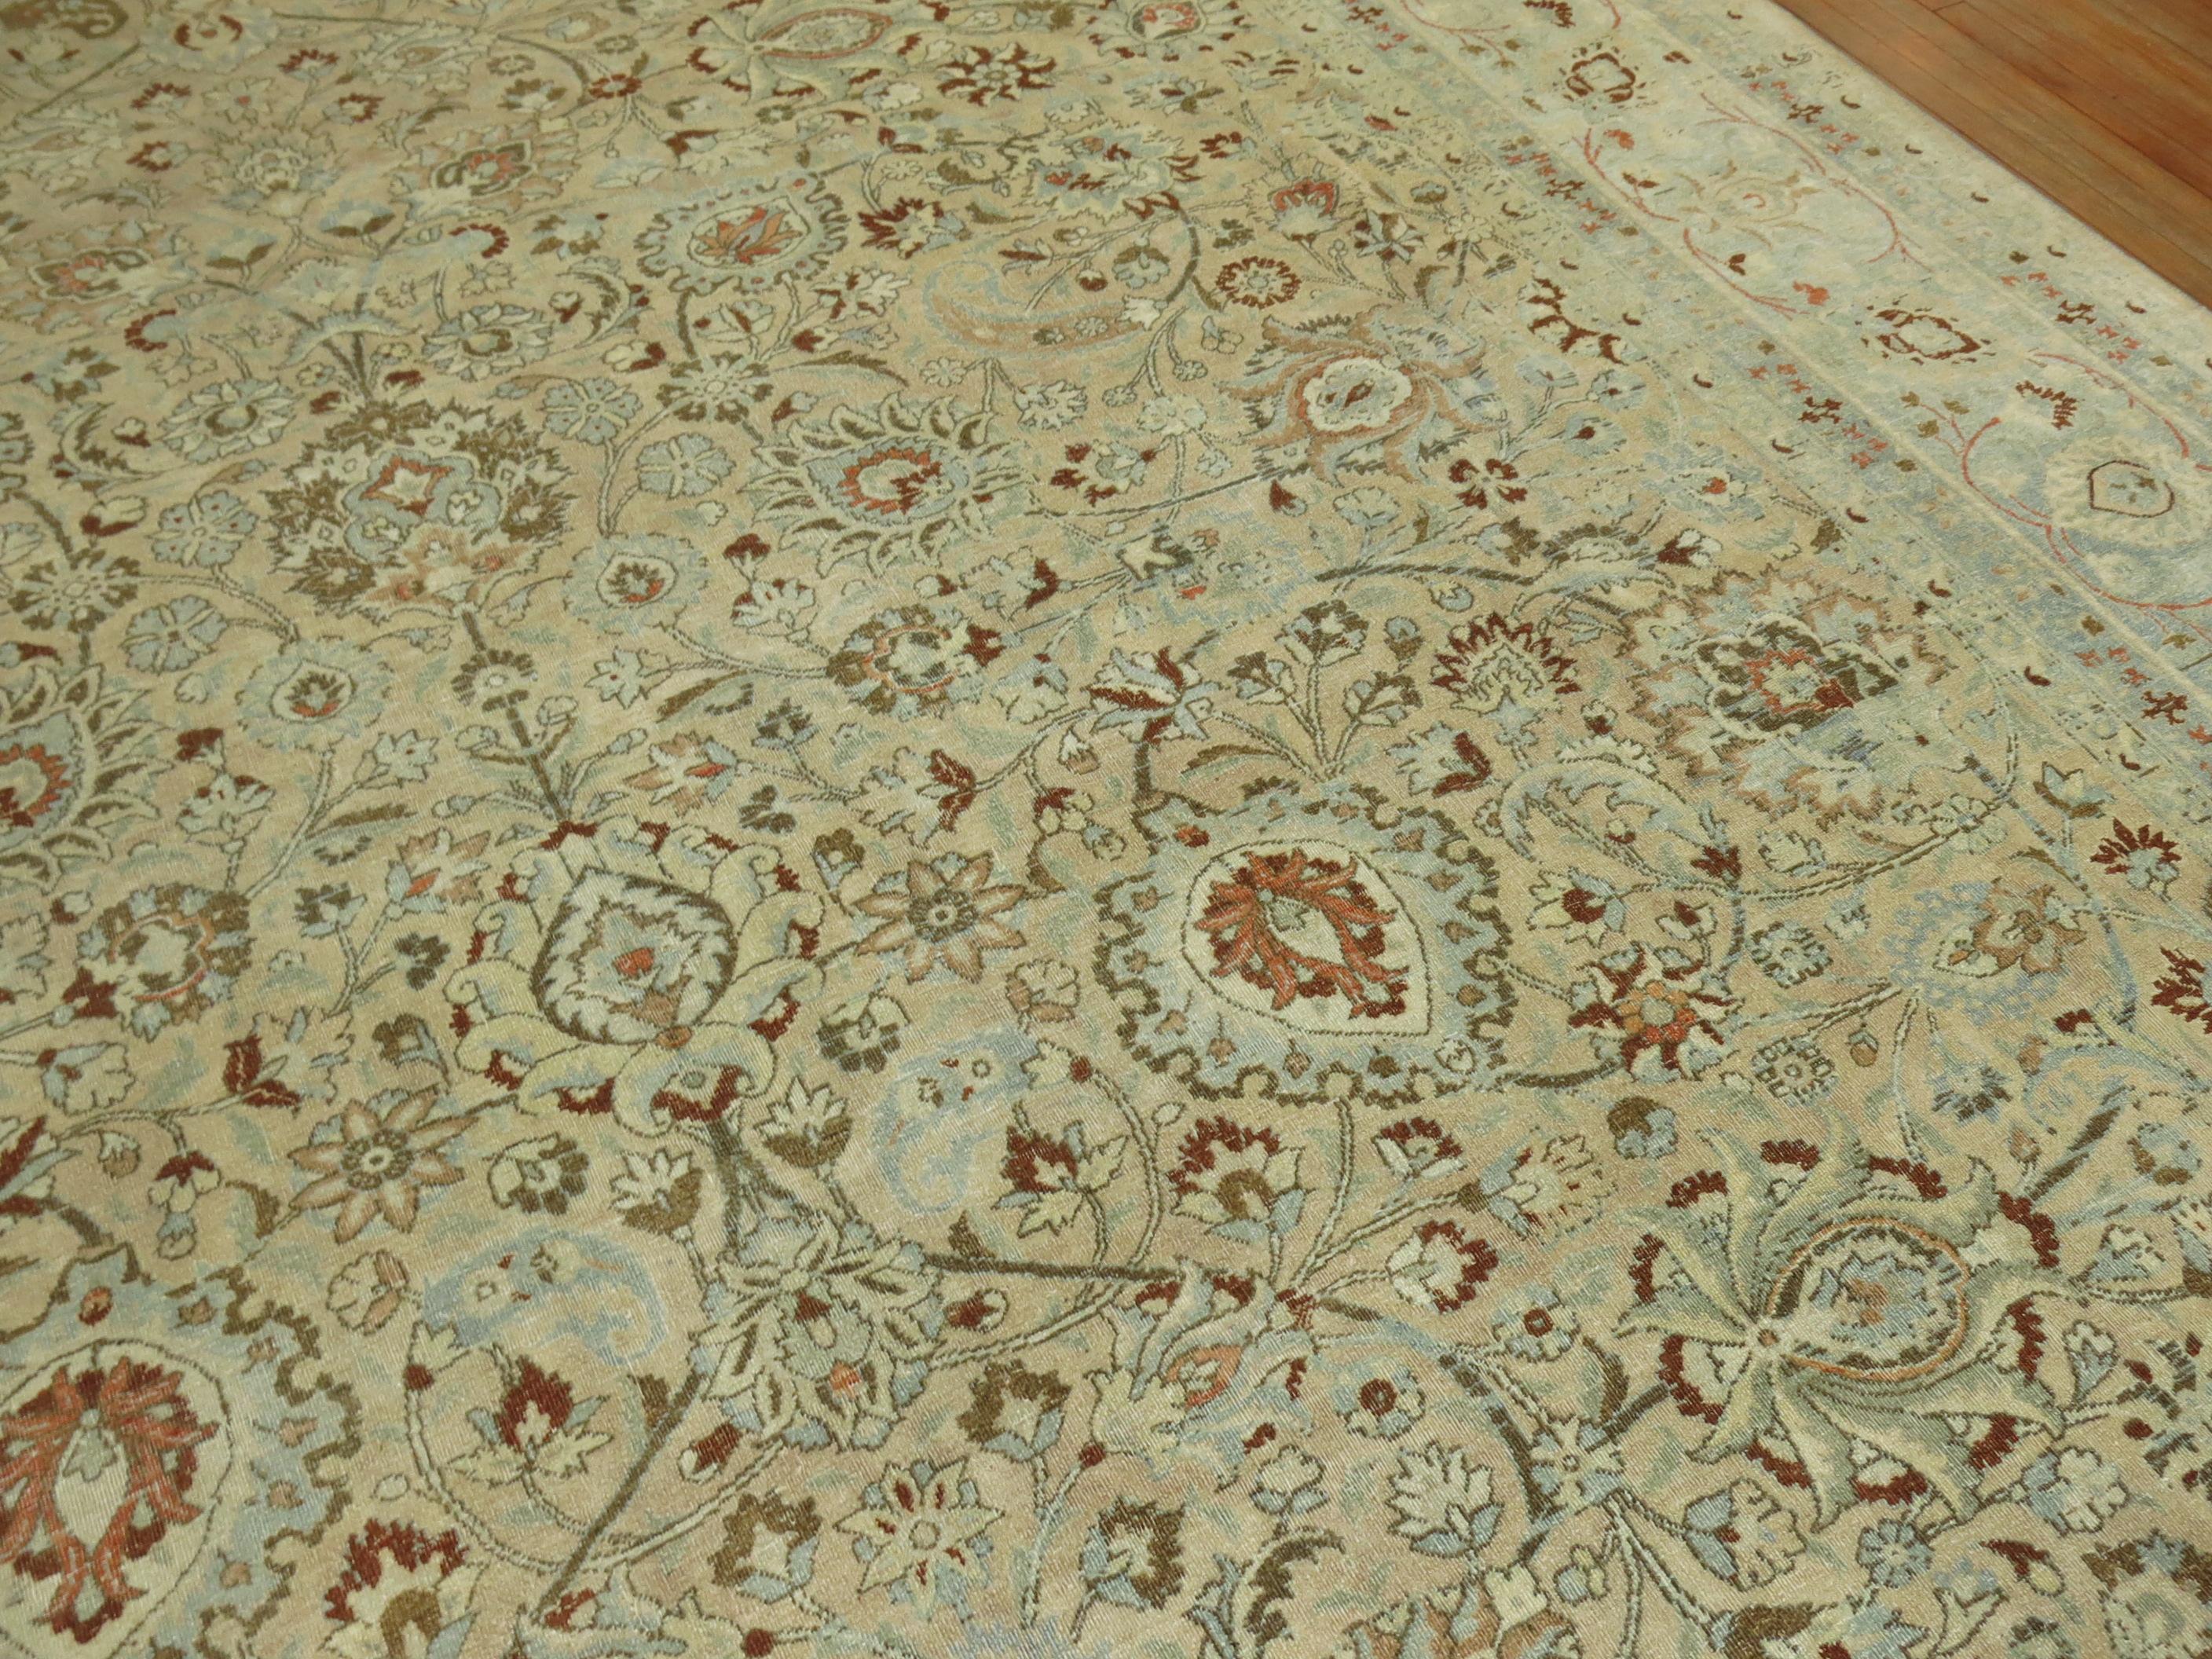 Hand-Knotted Stunning Tan Icy Blue Antique Persian Formal Meshed Rug, 20th Century For Sale